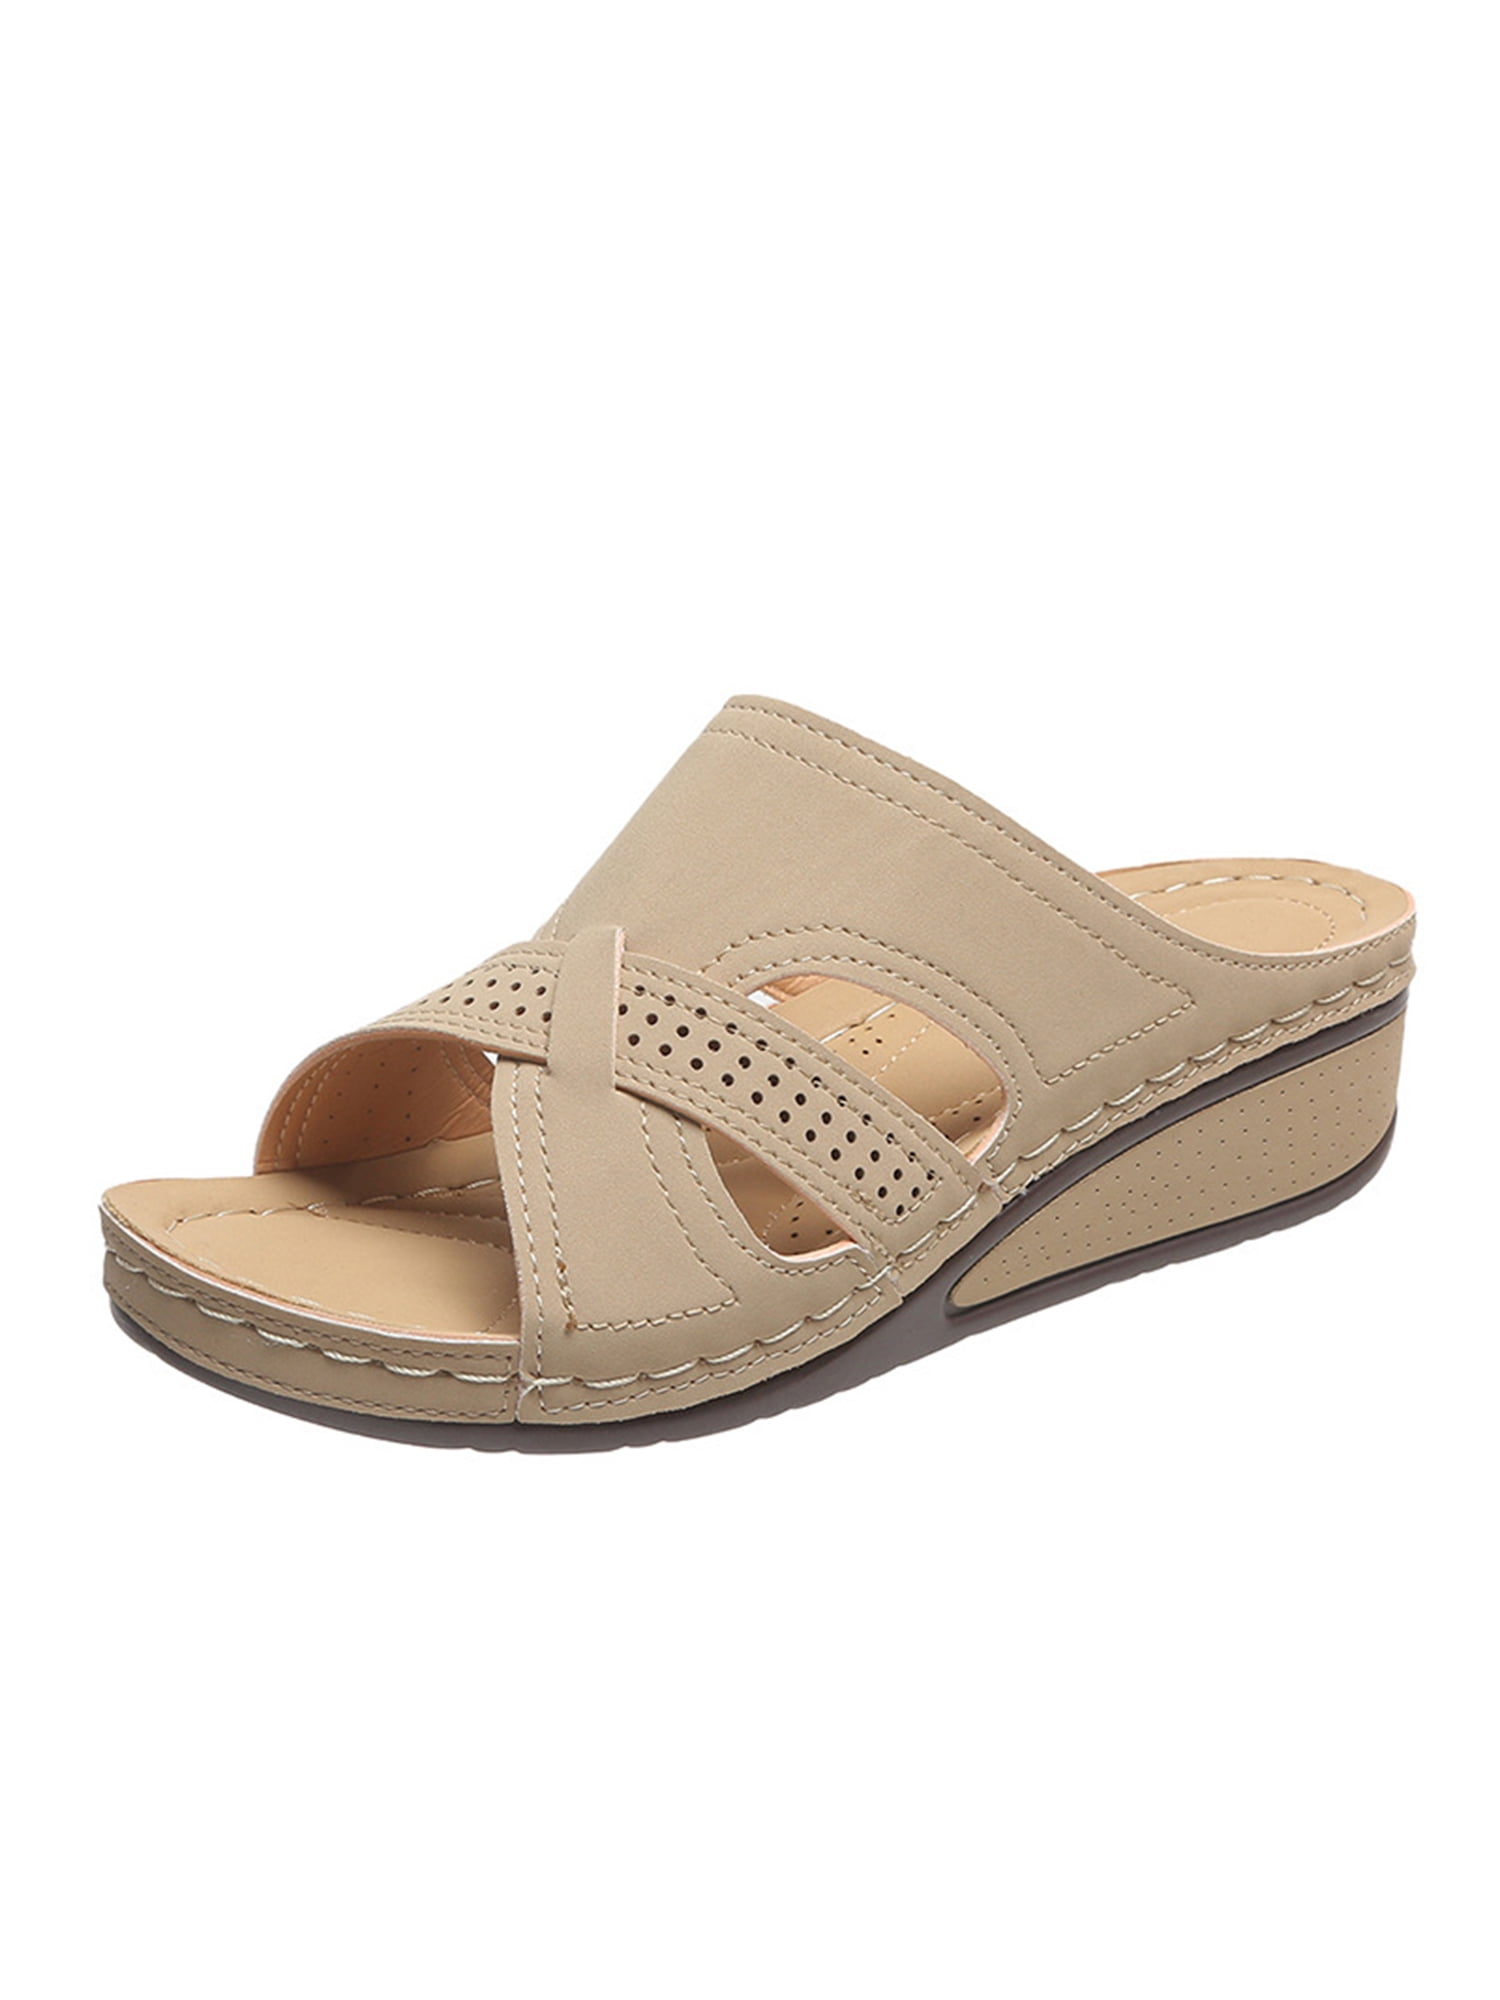 Daeful Wedge Sandals for Women Comfortable Arch Support Slide Sandal ...